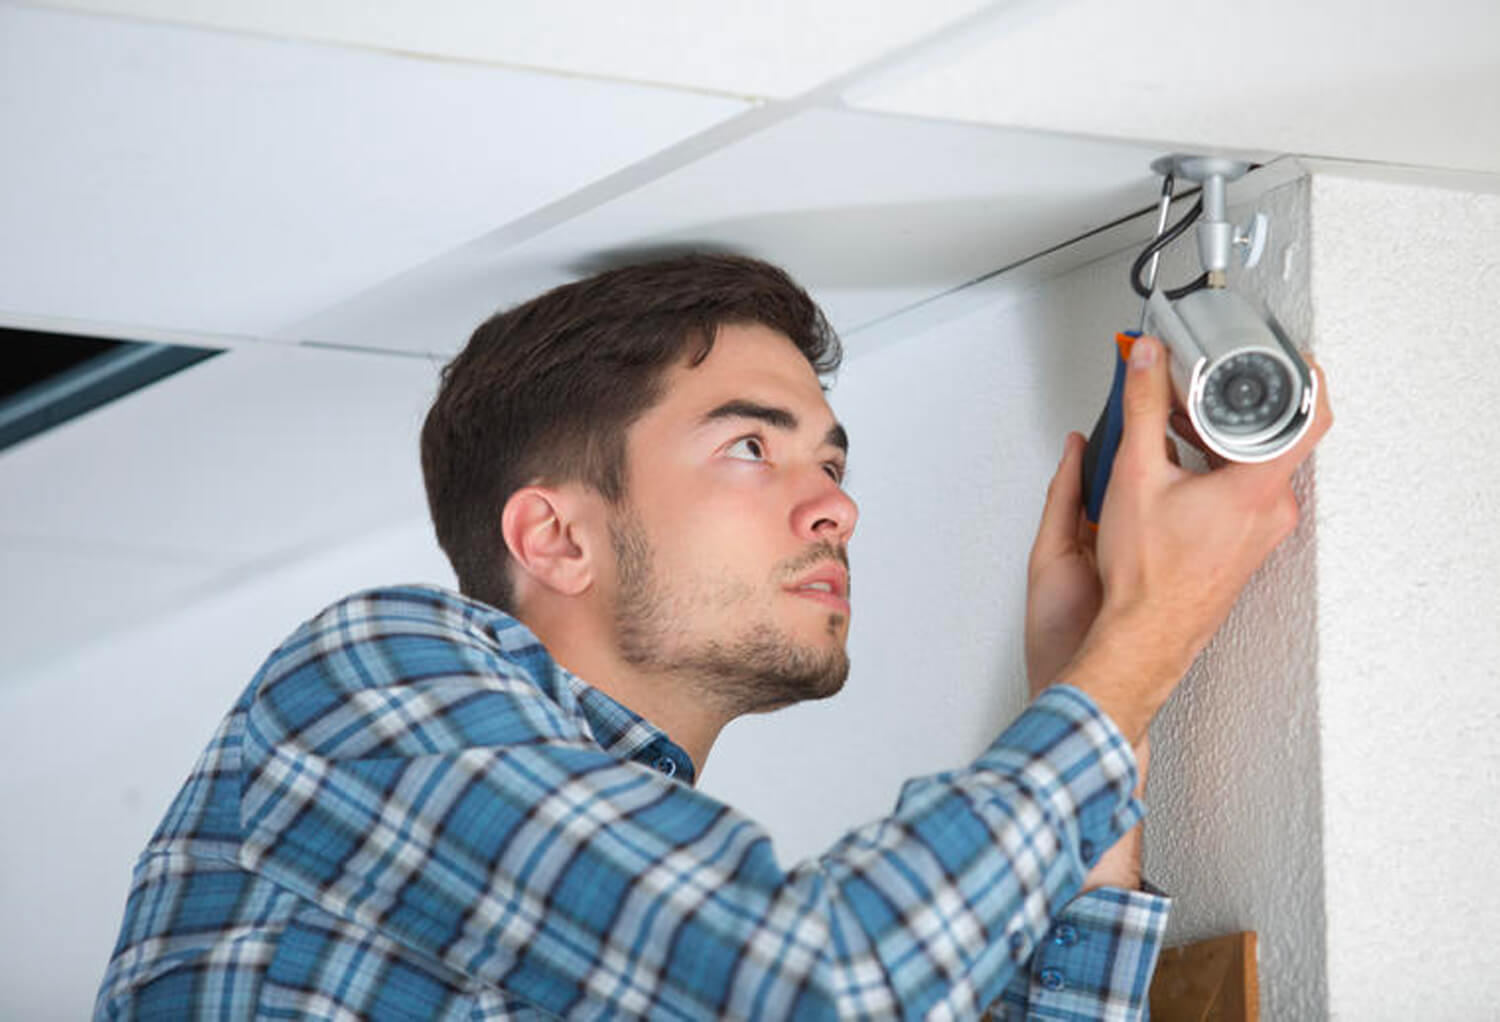 Man installing security camera on ceiling